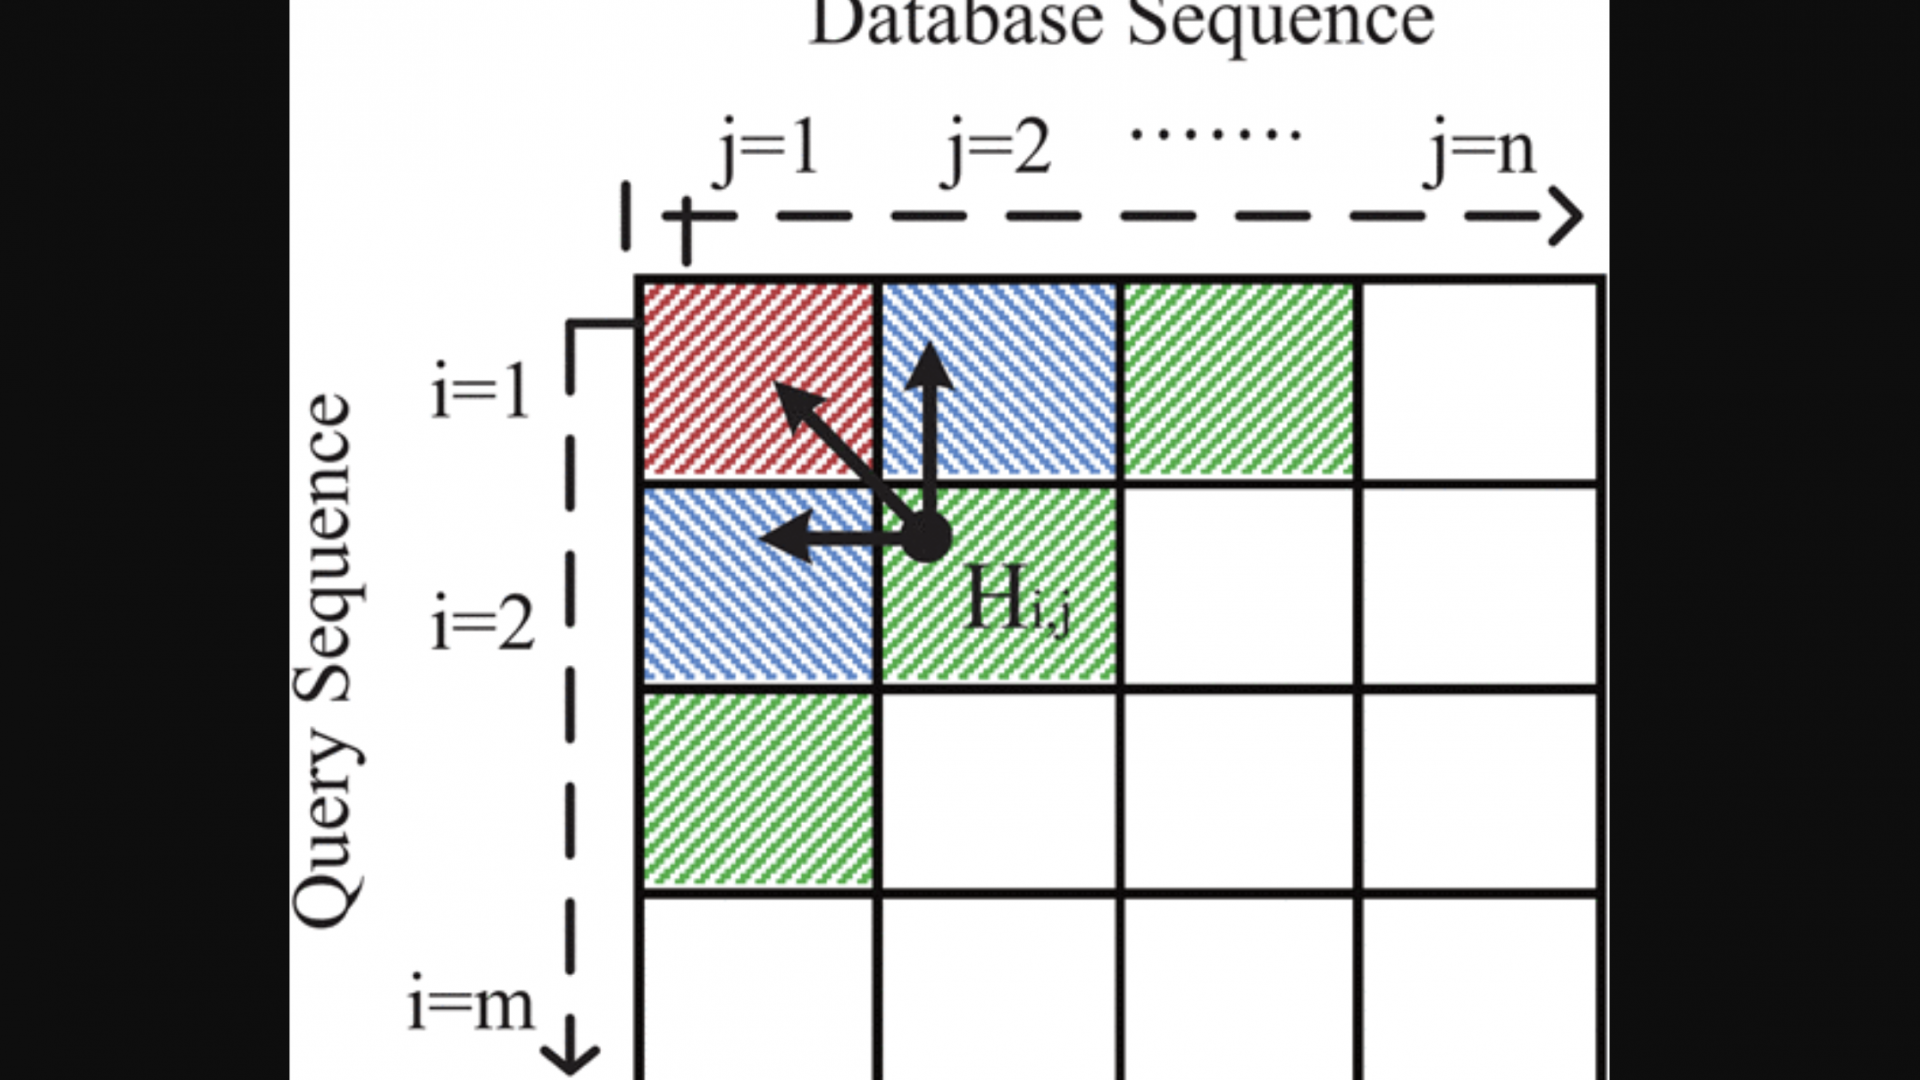 An adaptive hybrid multiprocessor technique for bioinformatics sequence alignment